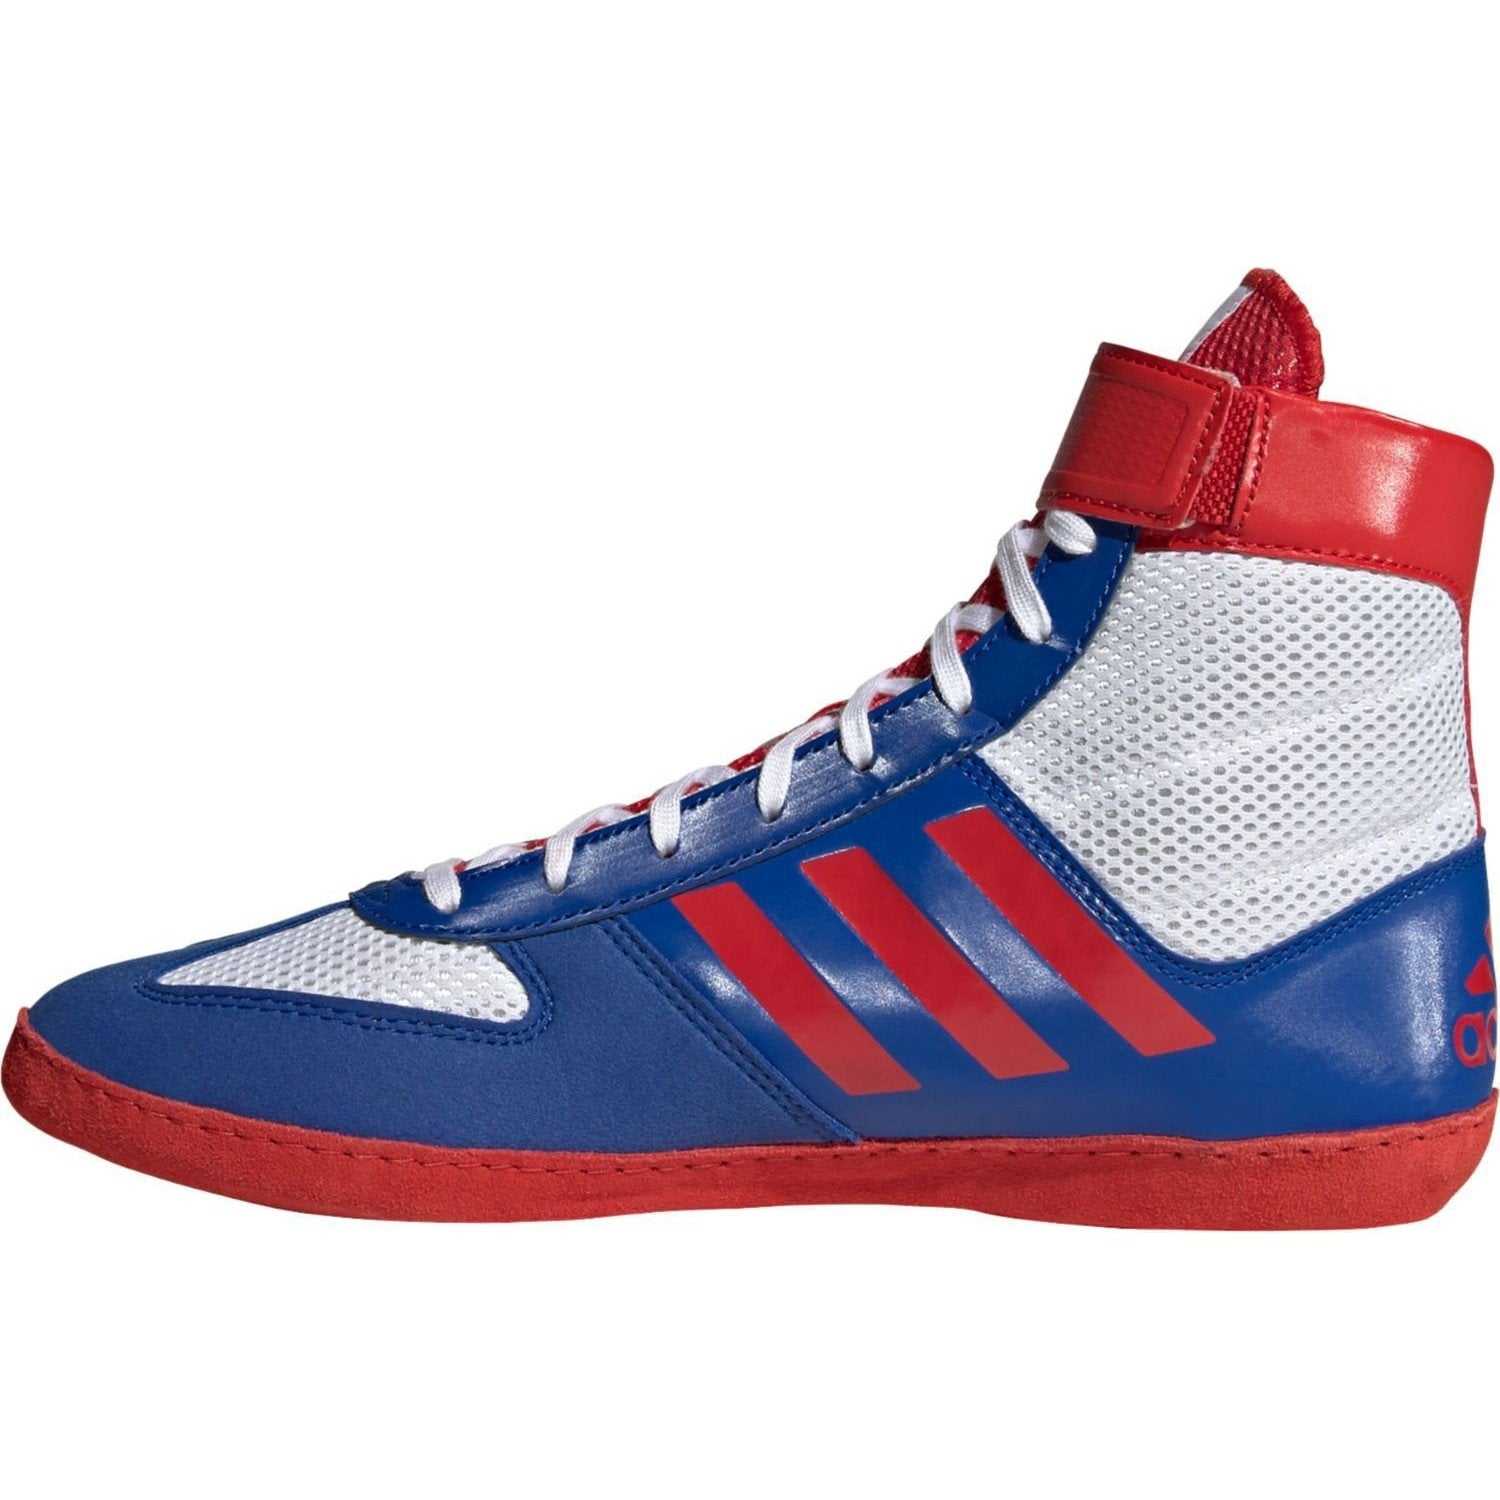 Adidas 224 Combat Speed Wrestling Shoes - White Royal Red